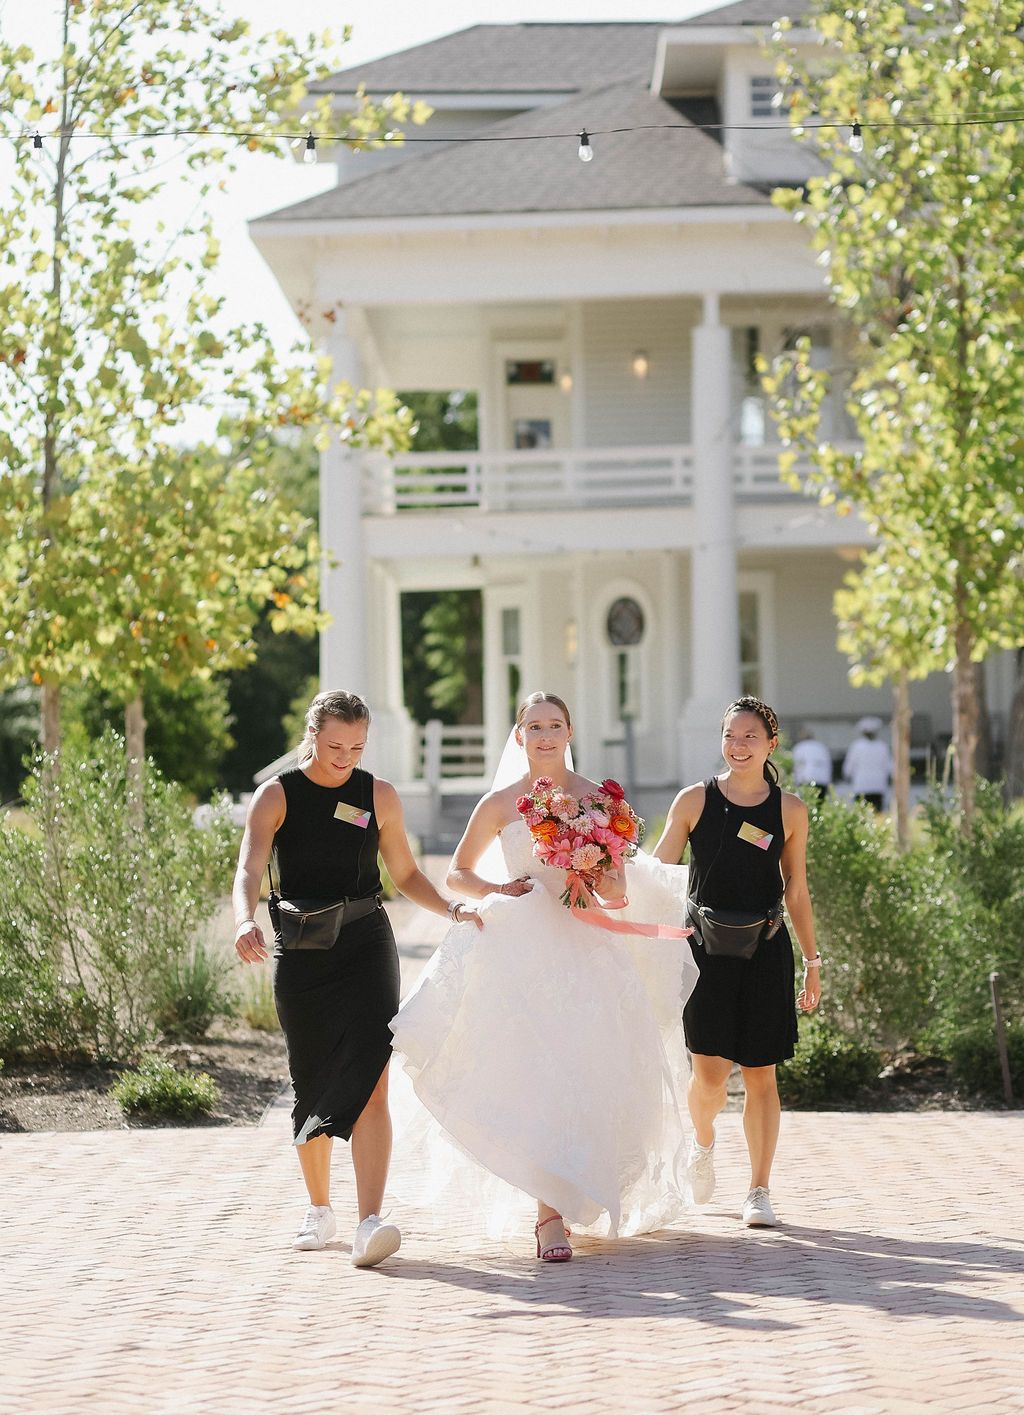 Austin wedding planners carrying bride's dress at The Grand Lady